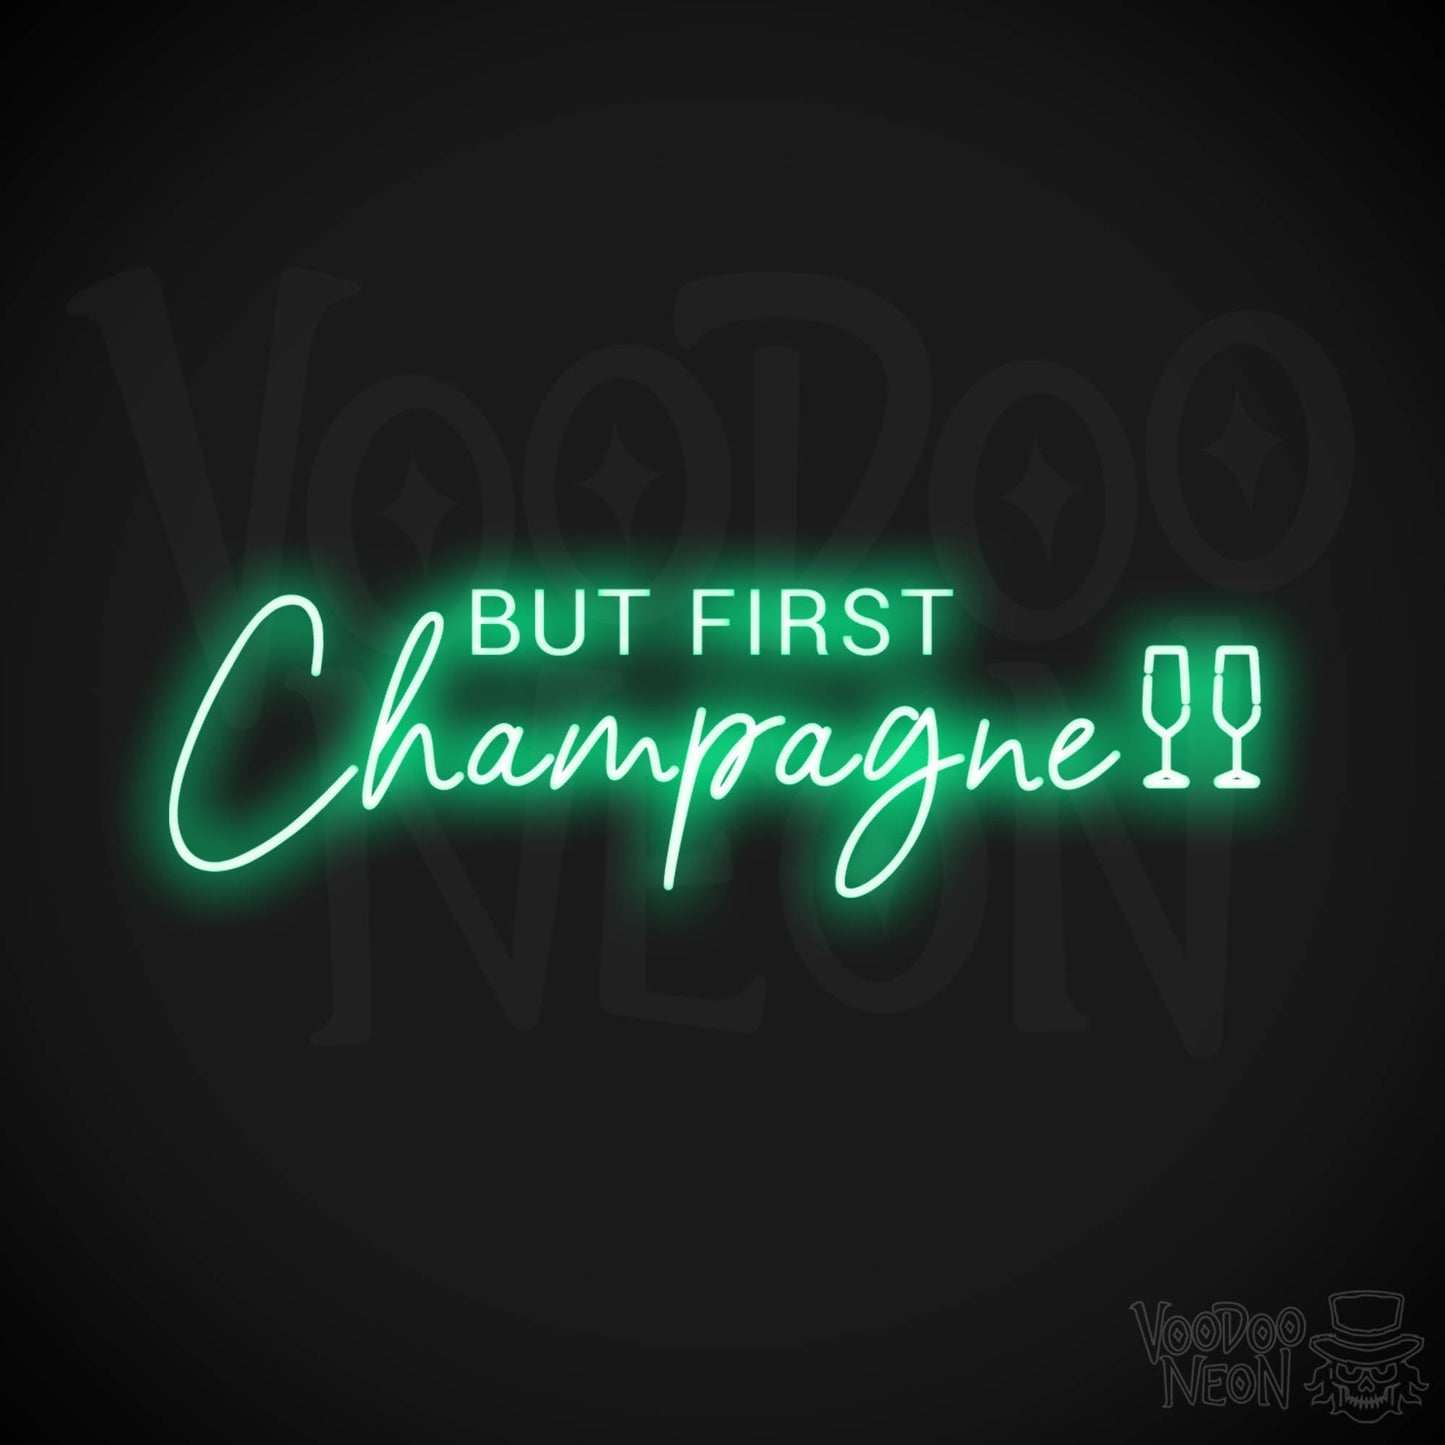 But First Champagne Neon Sign - Neon But First Champagne Sign - Neon Wall Art - Color Green